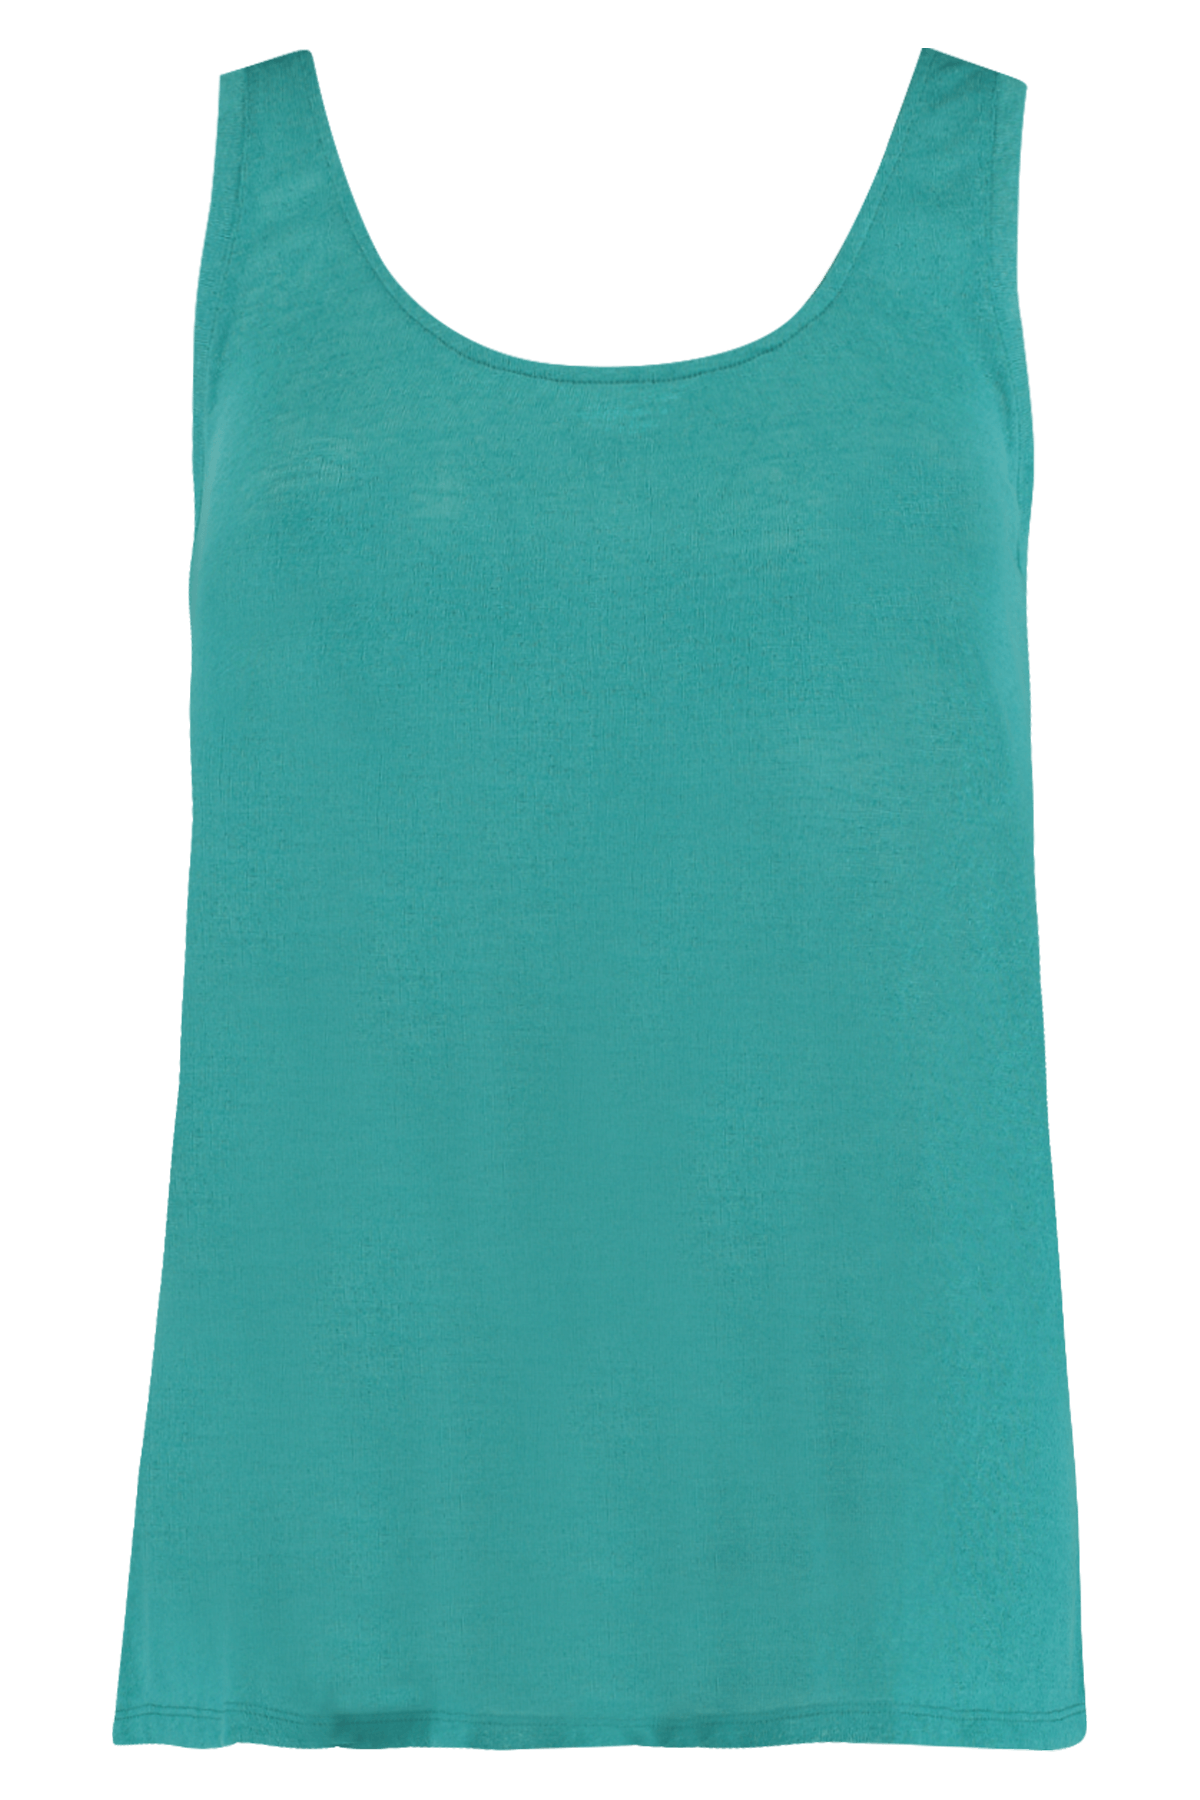 Knit top image 1